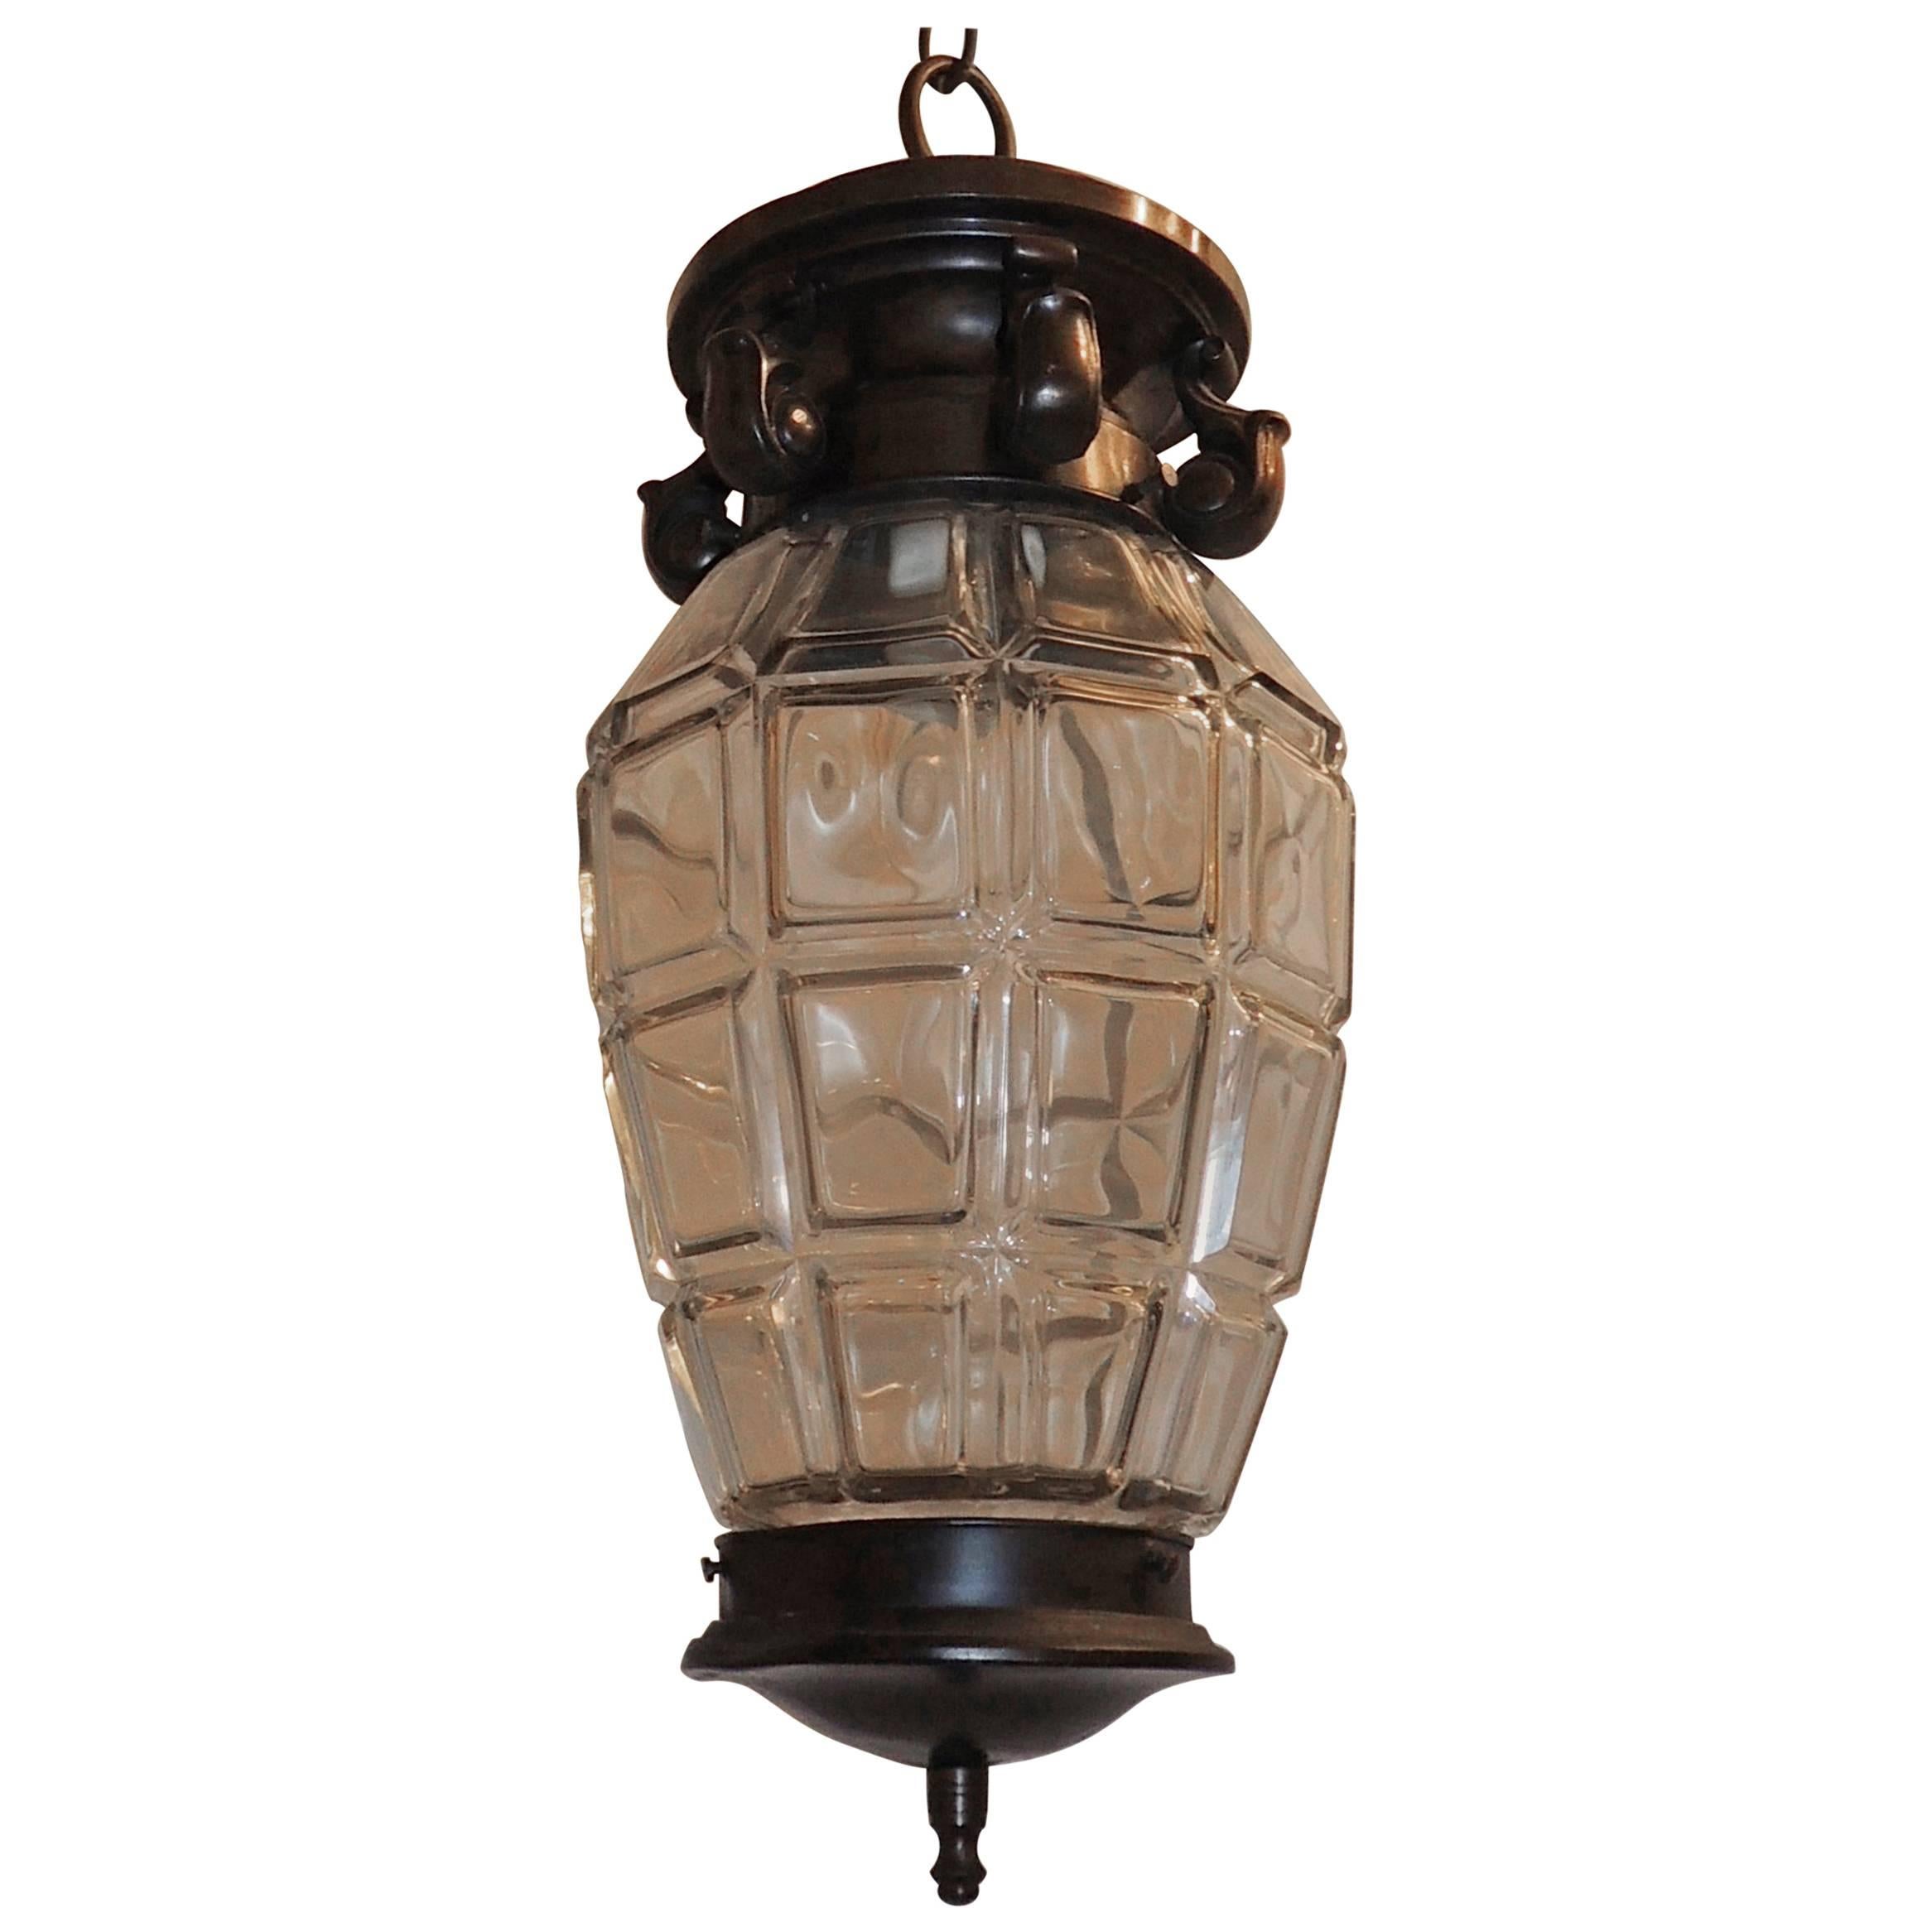 Handsome French Patine Bronze Beveled Panel Glass Lantern Pendent Fixture